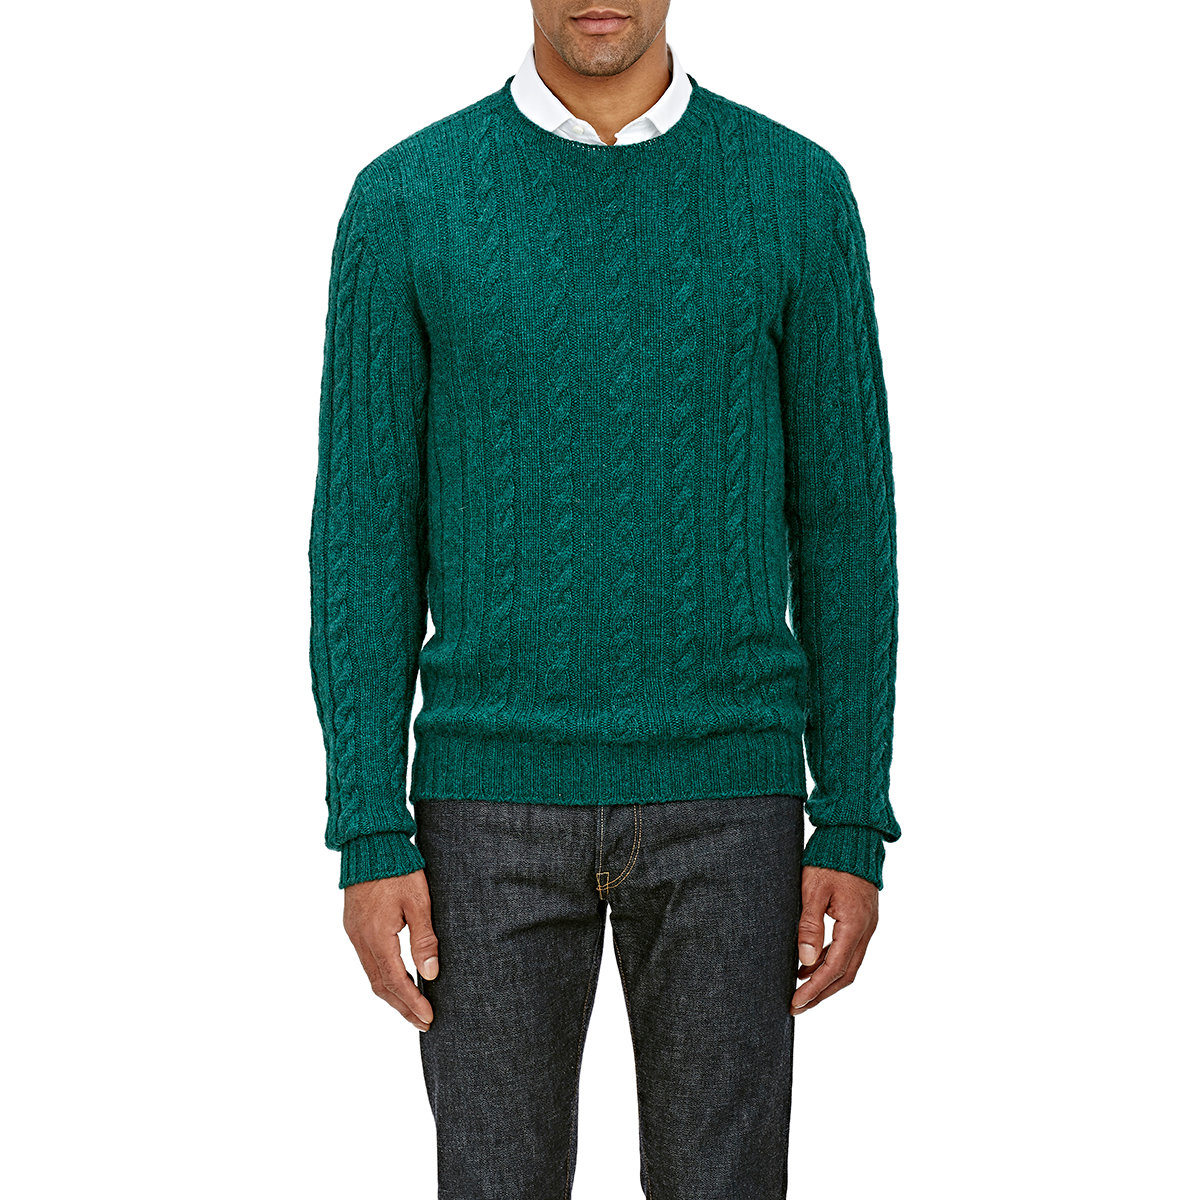 Lyst - Isaia Cable-knit Cashmere Sweater in Green for Men